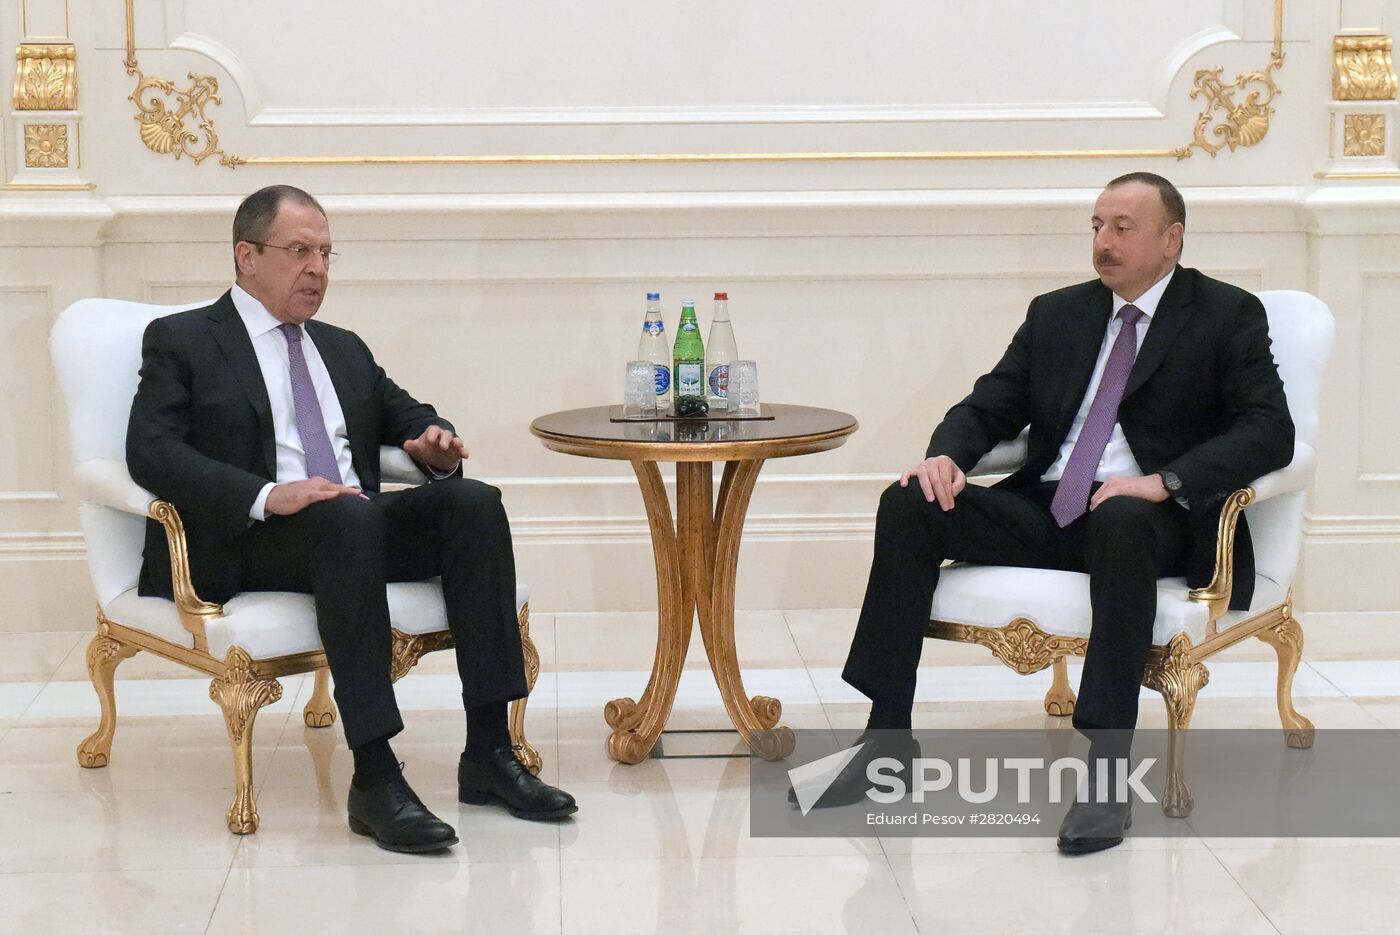 Russian Foreign Minister Sergei Lavrov meets with President of Azerbaijan Ilham Aliyev